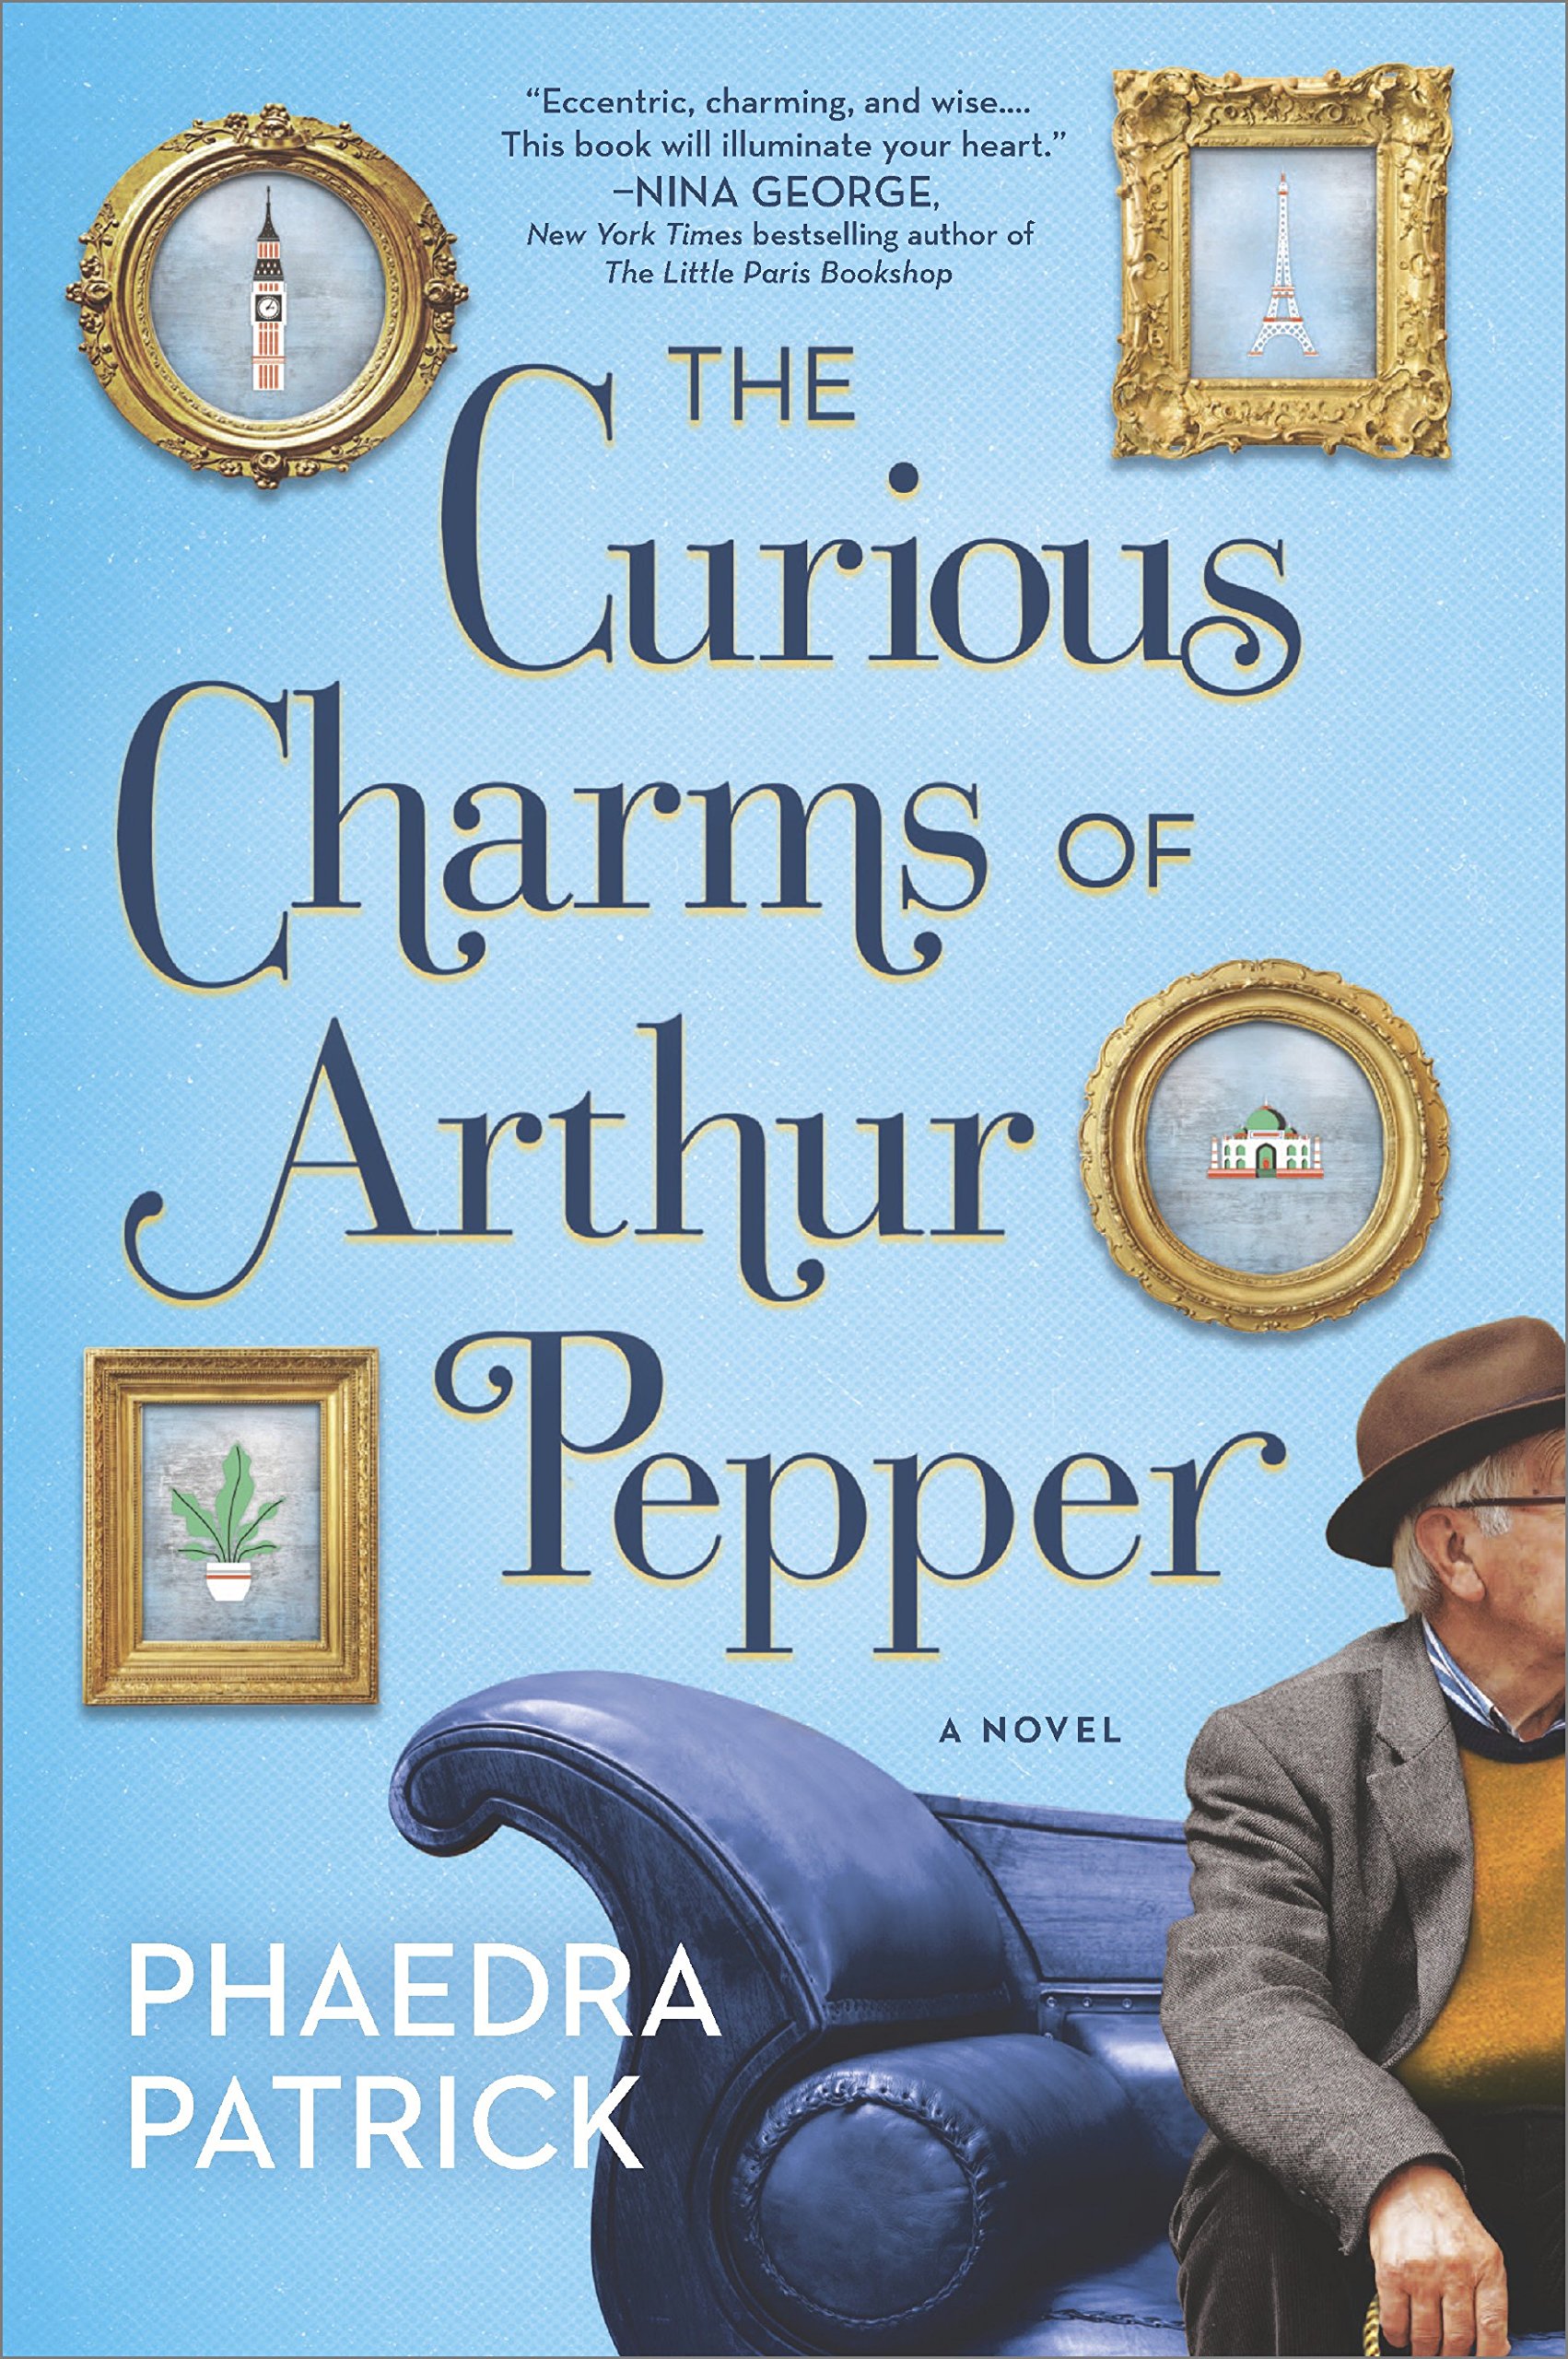 THE CURIOUS CHARMS OF ARTHUR PEPPER Book Cover